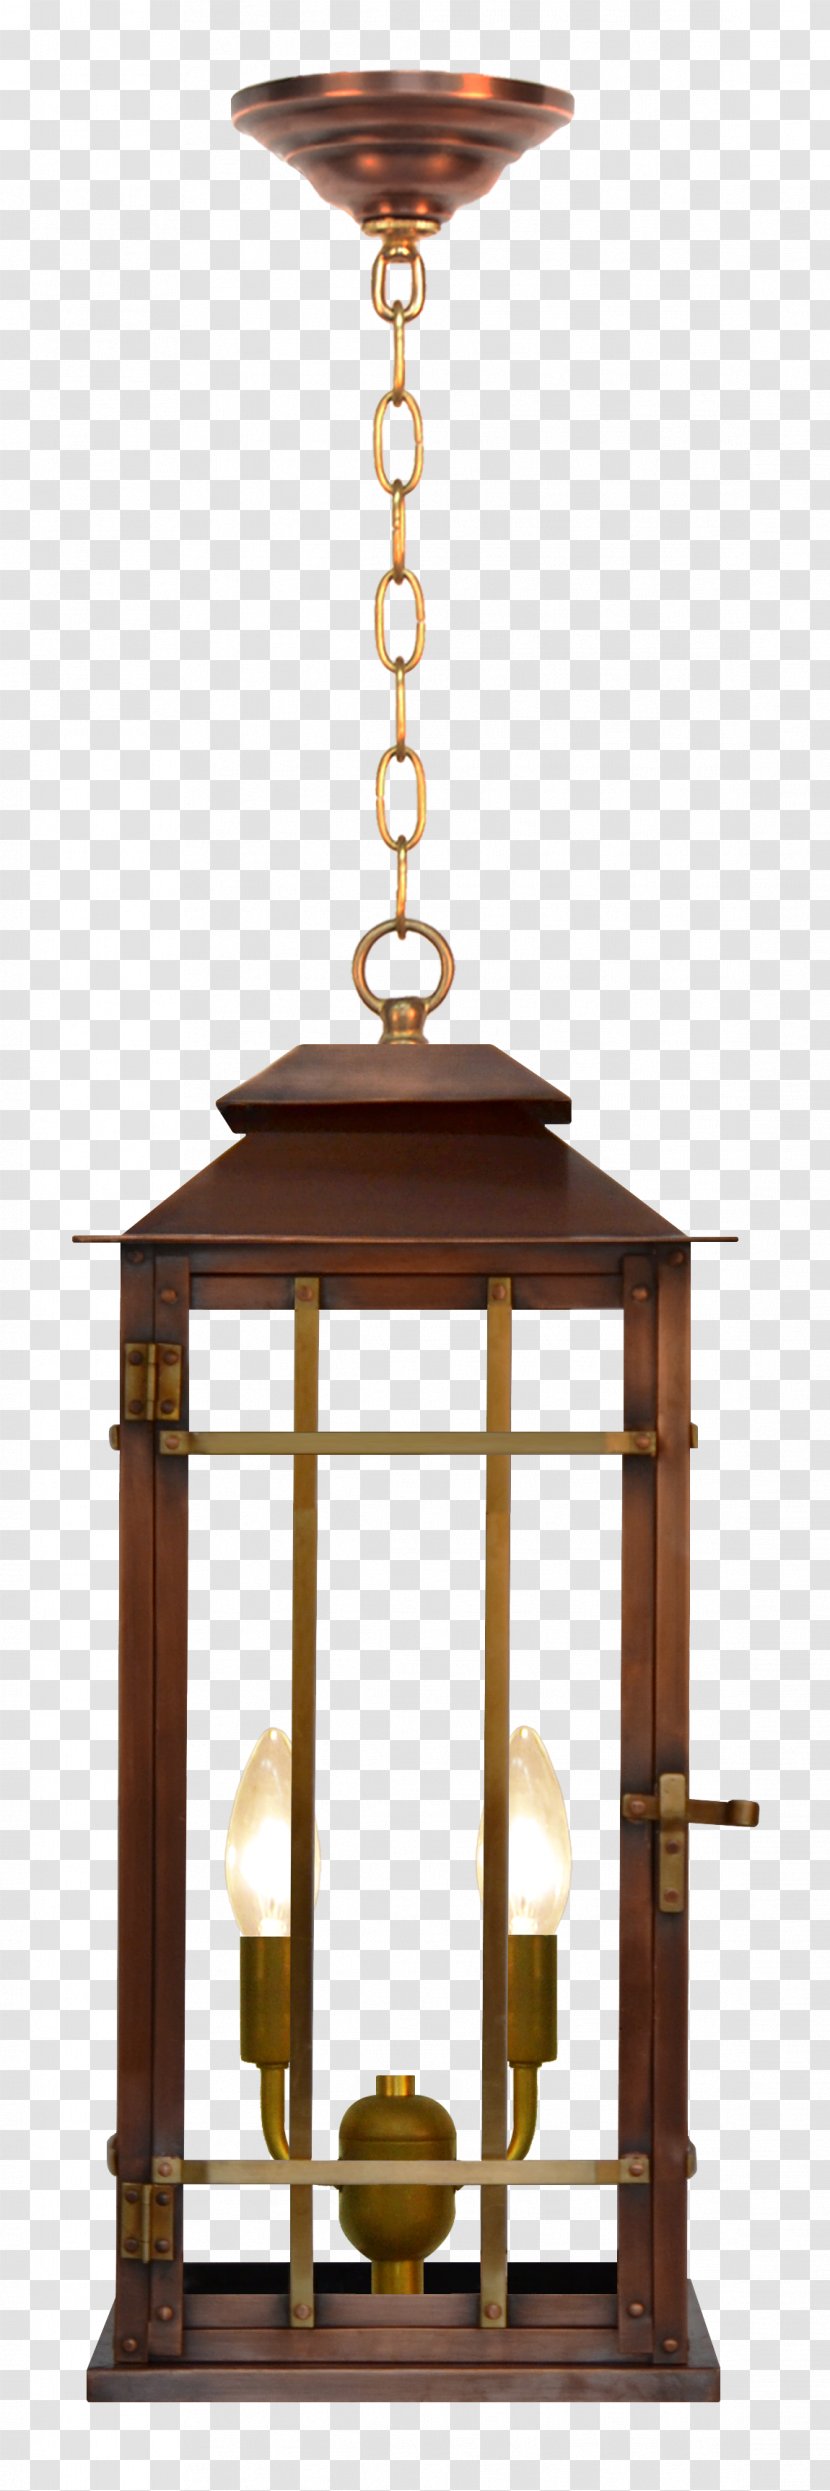 Gas Lighting Lantern Light Fixture - Table Ship Anchor Chains Transparent PNG